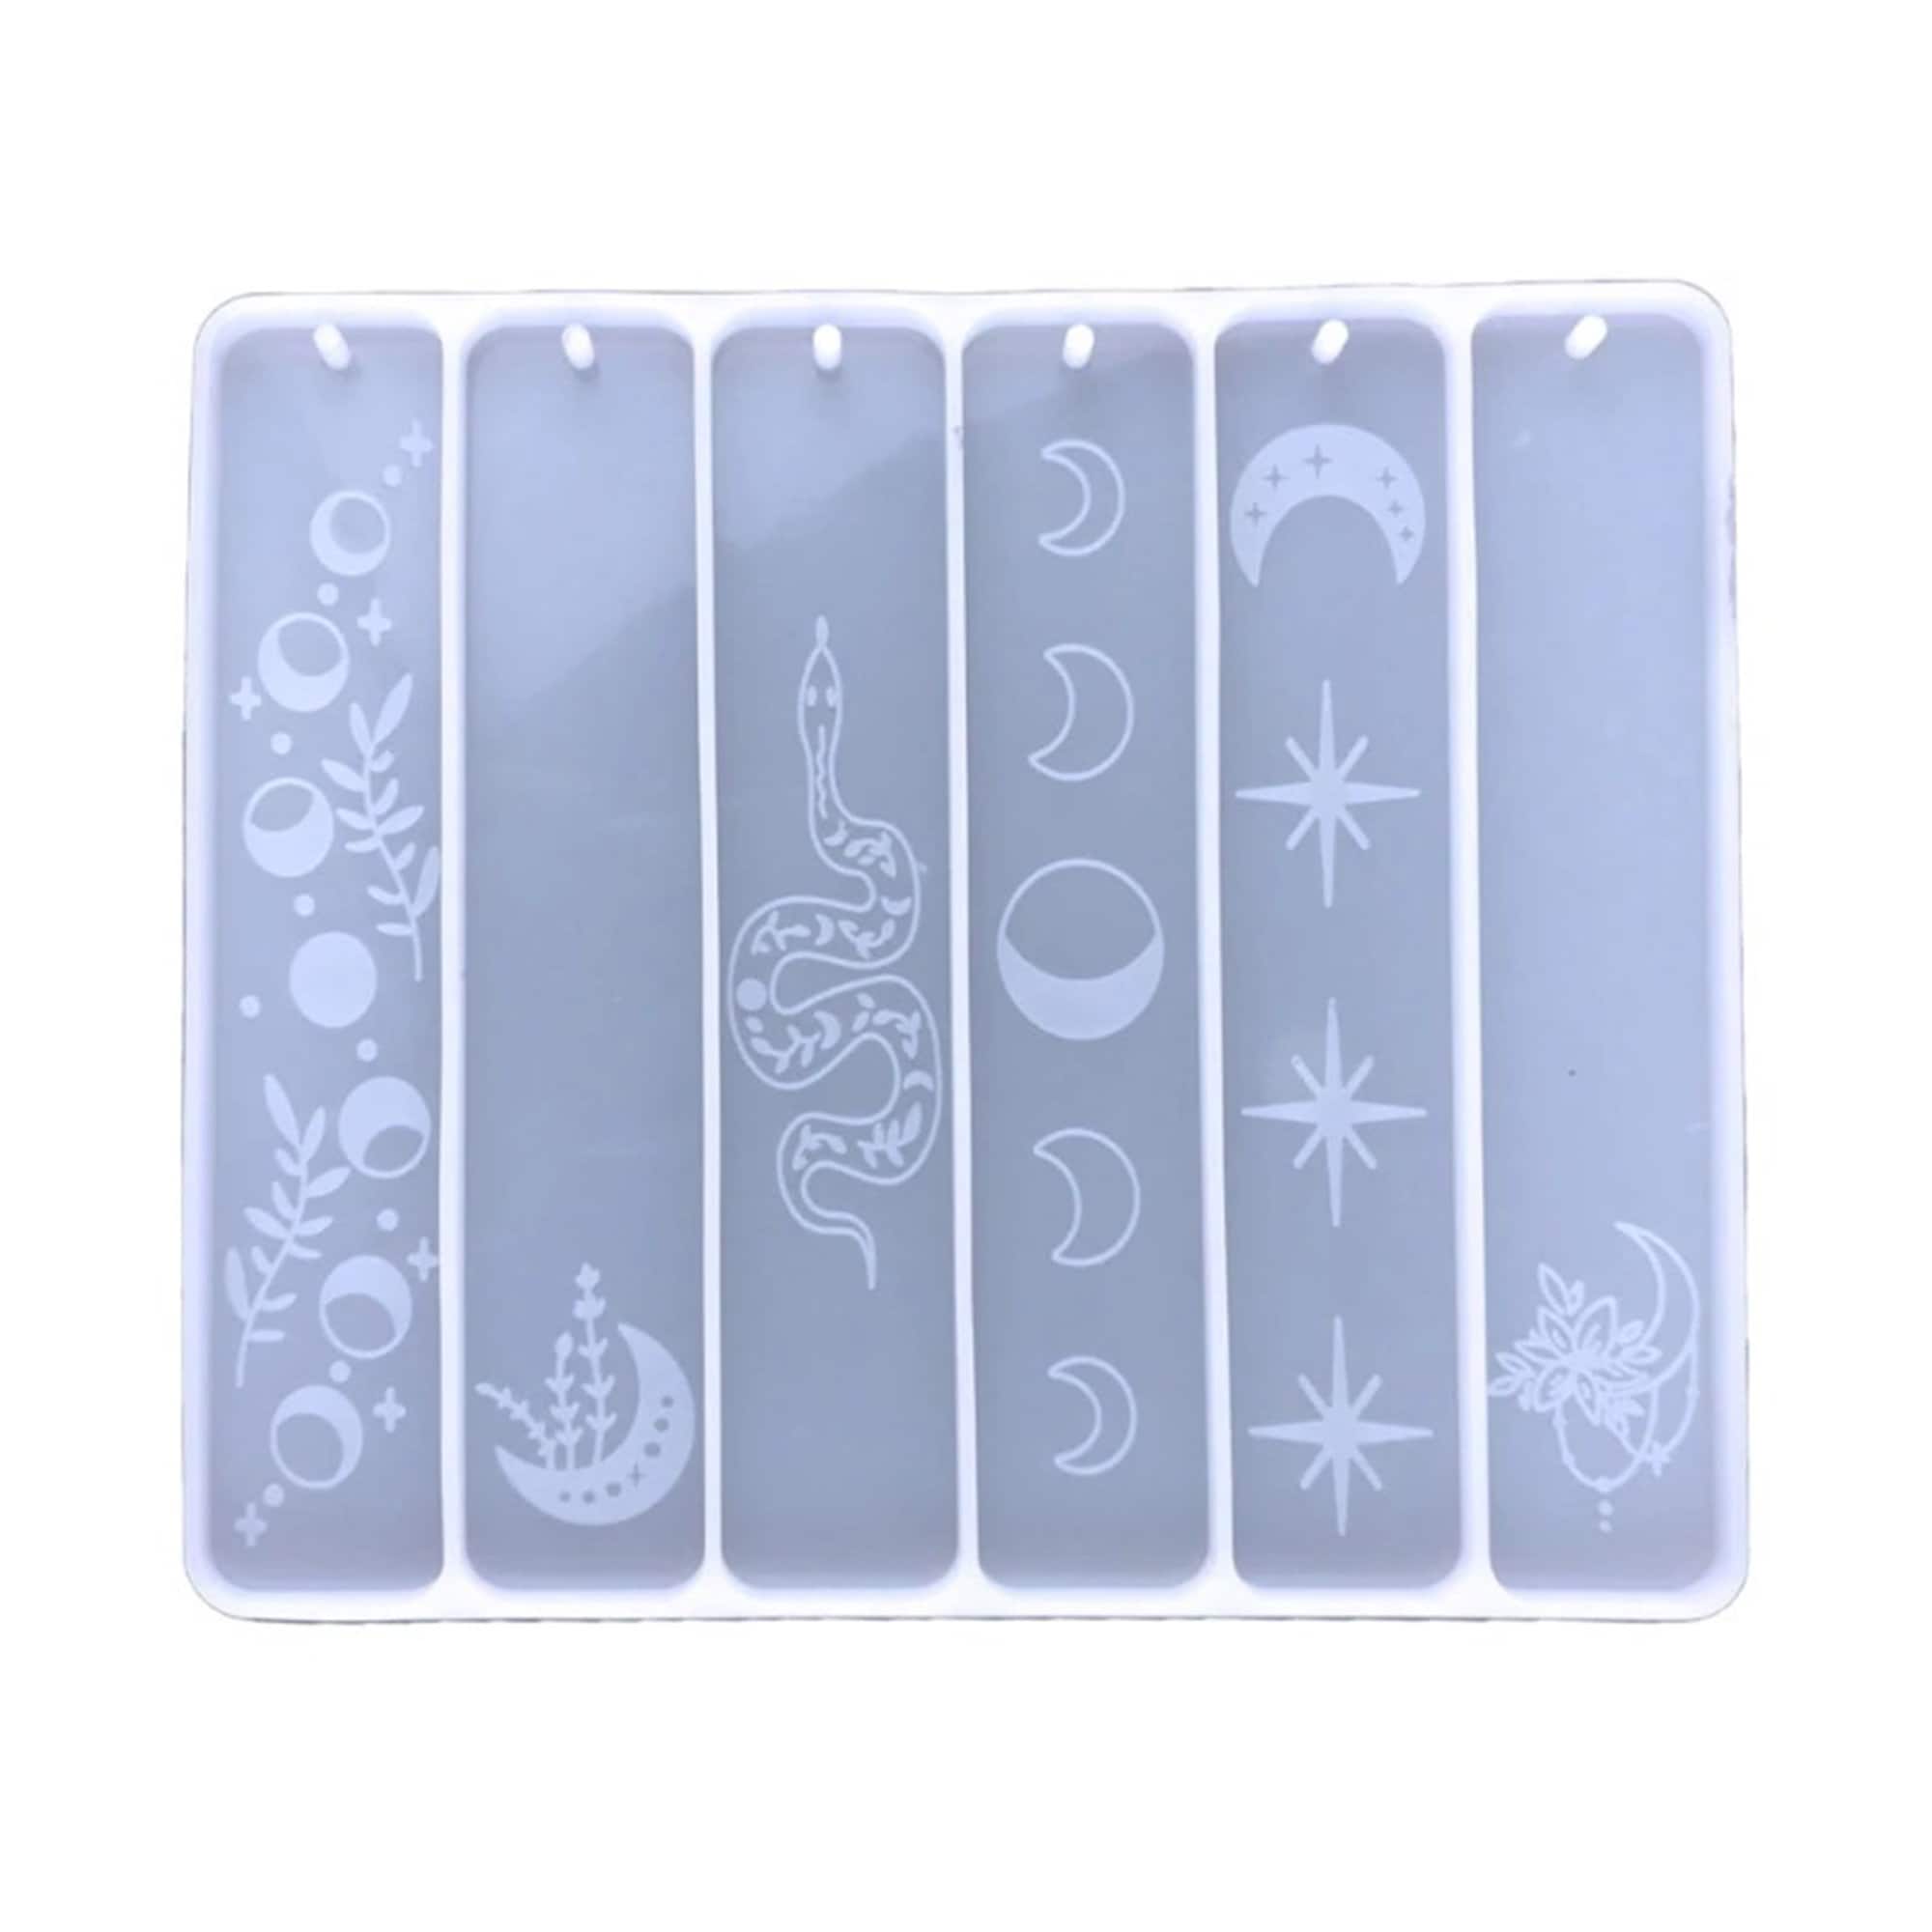 NEW Silicone Bookmark Mold,resin Mold for Bookmark,resin Bookmark Molds,diy Resin  Mold,silicone Craft Moulds for Bookmark Making 